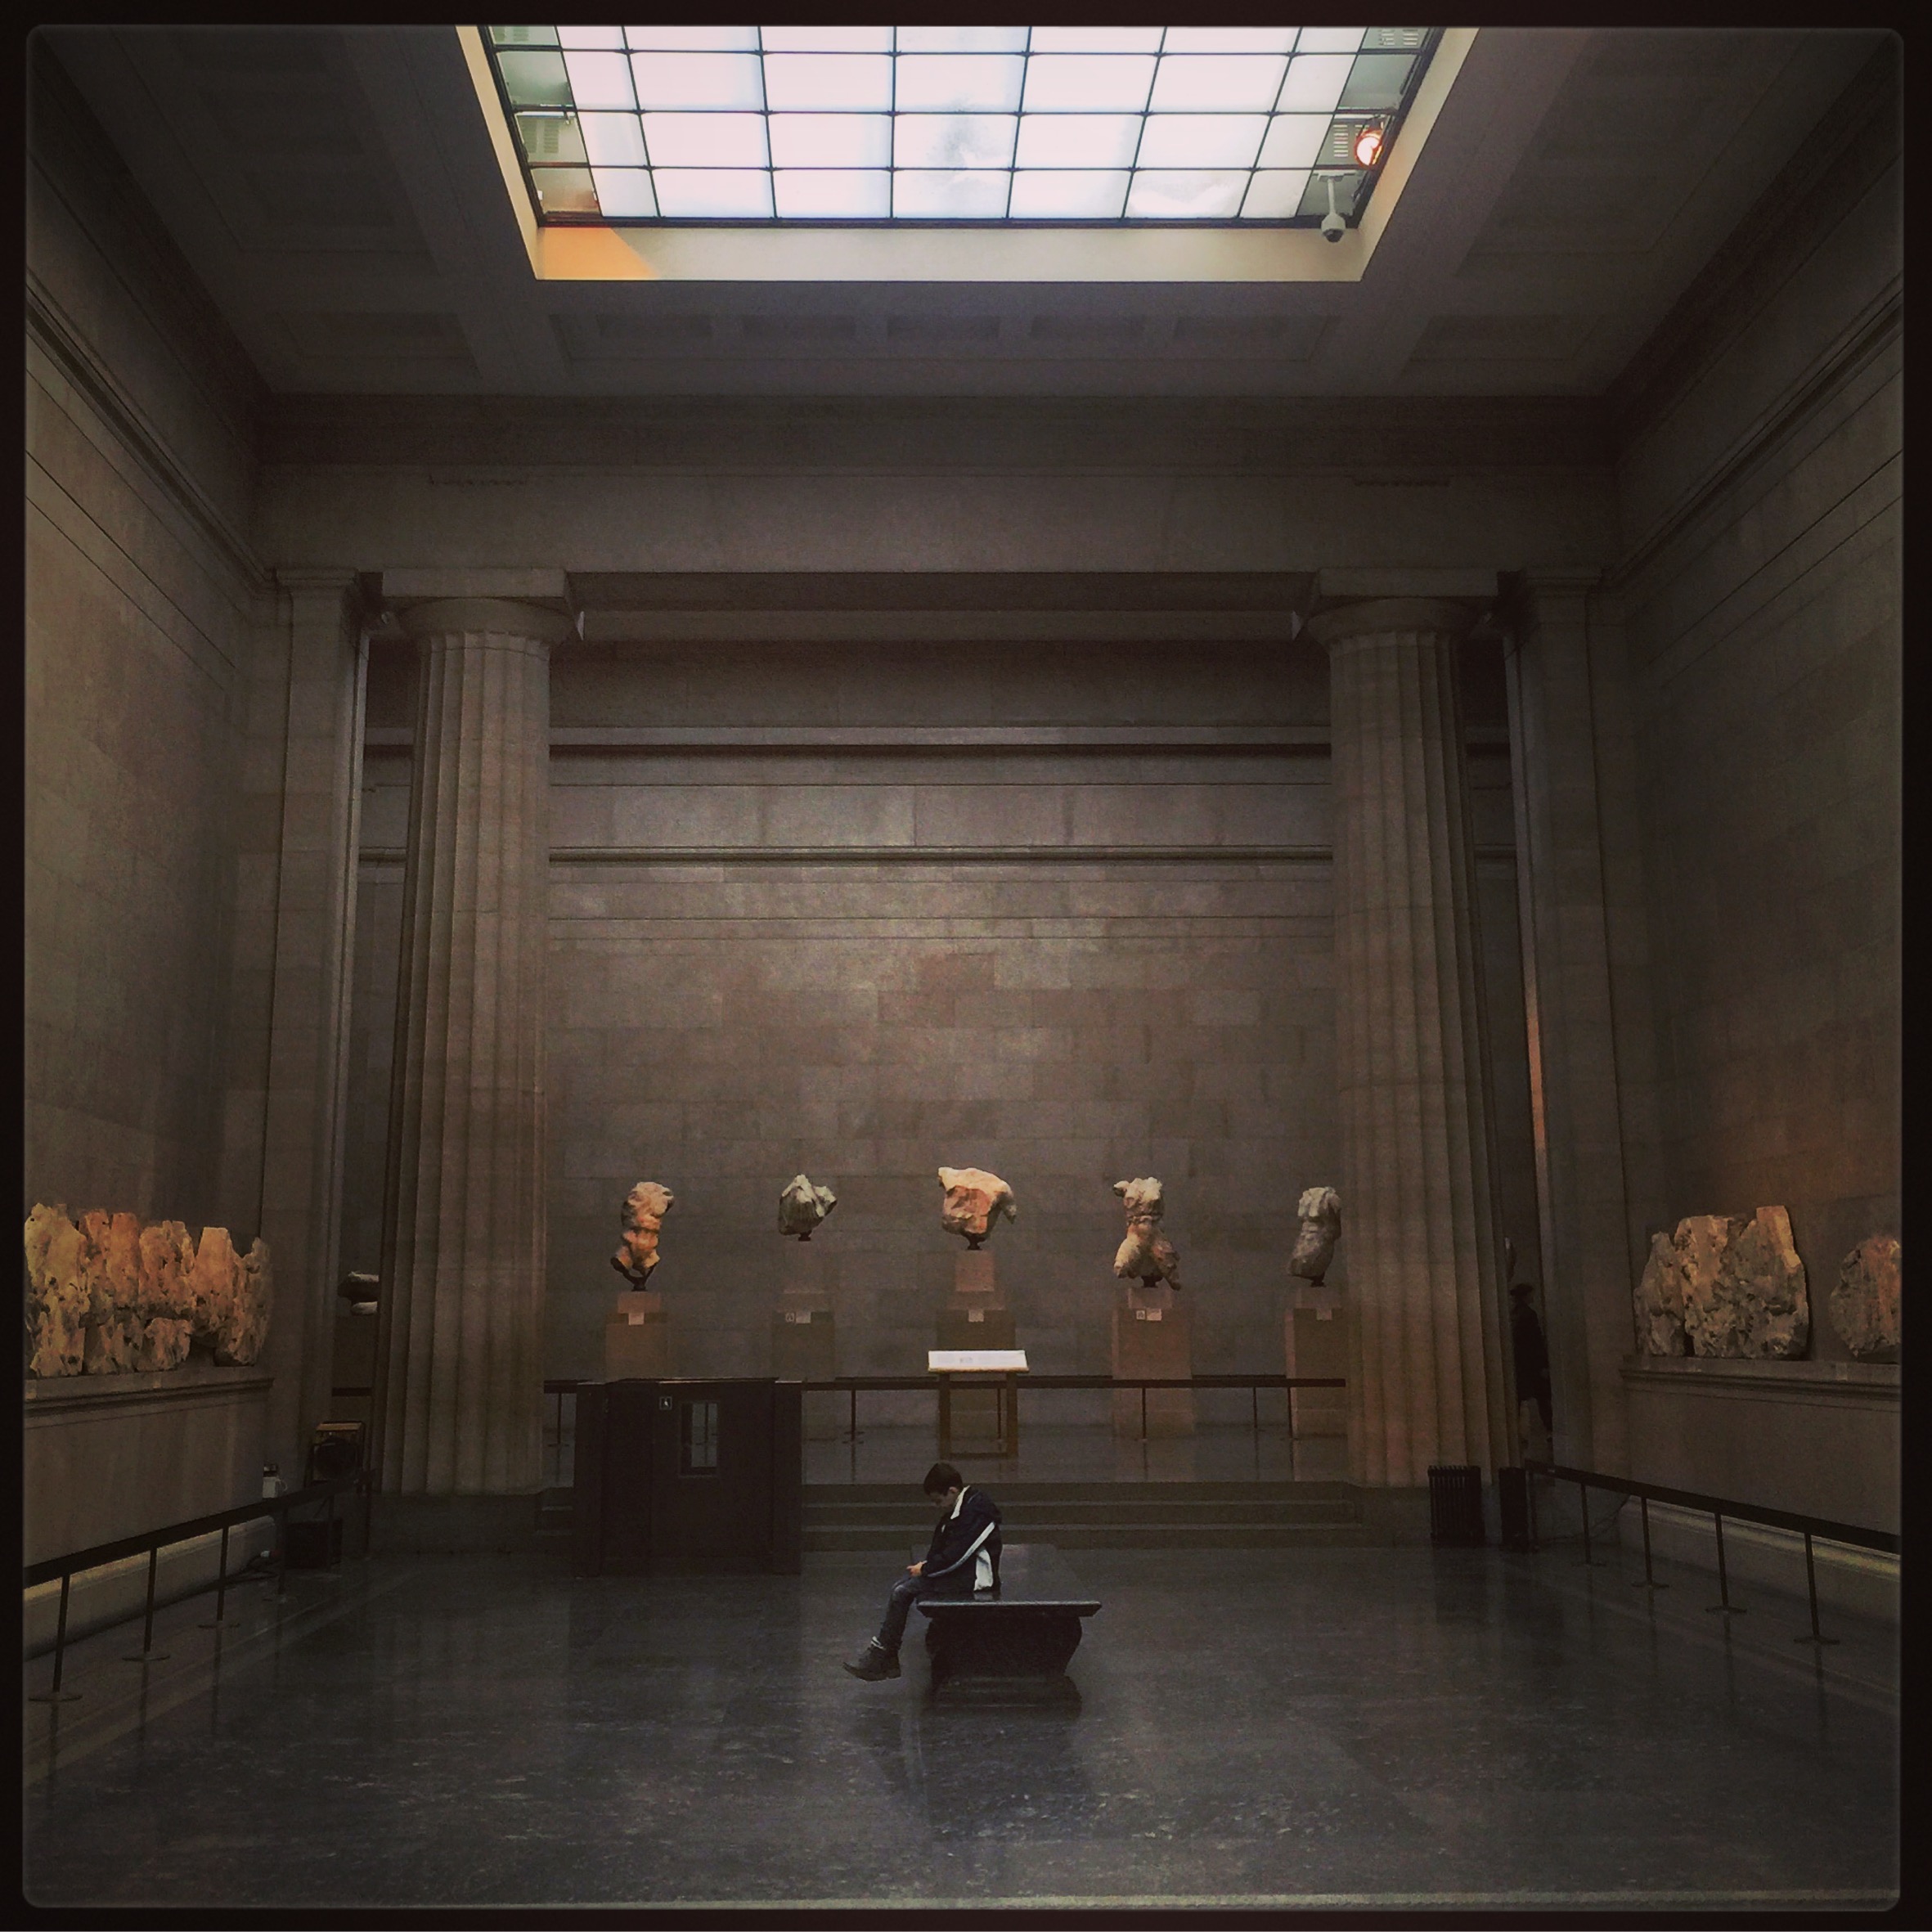  The quiet spaces of the Elgin marbles rooms was unexpected but very welcome. 